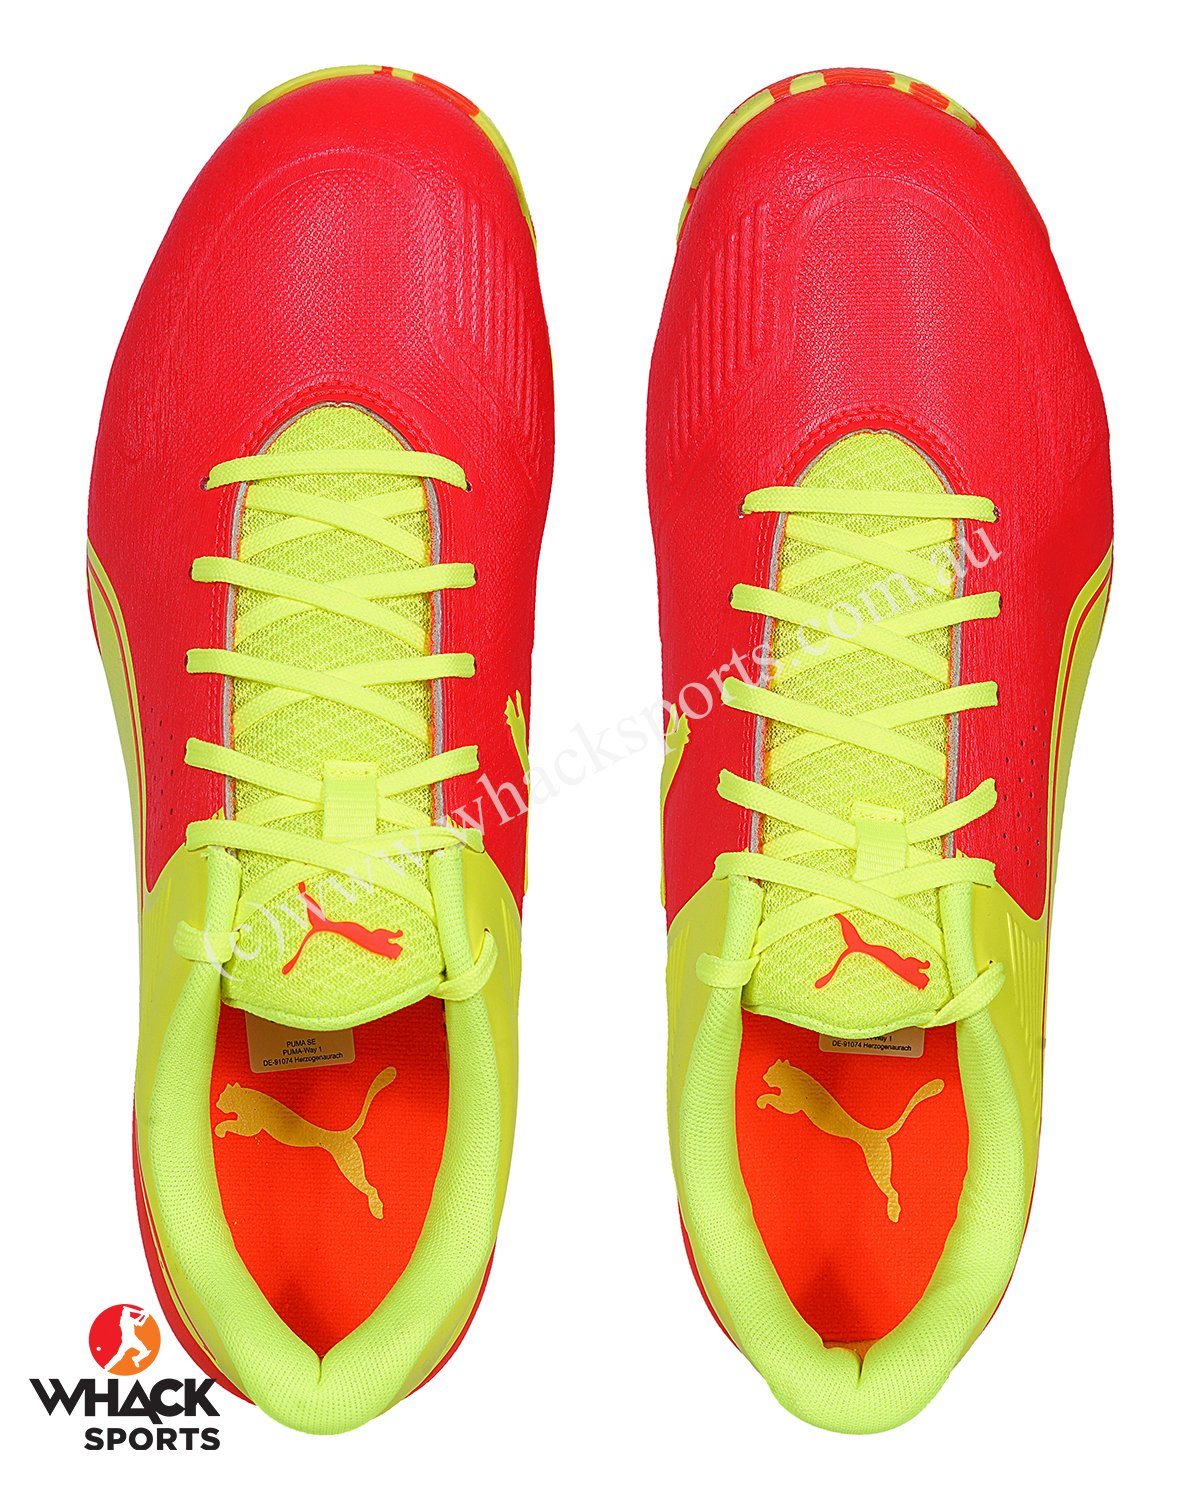 Puma 19 FH - Rubber Cricket Shoes - Red Blast/Yellow Alert – WHACK Sports